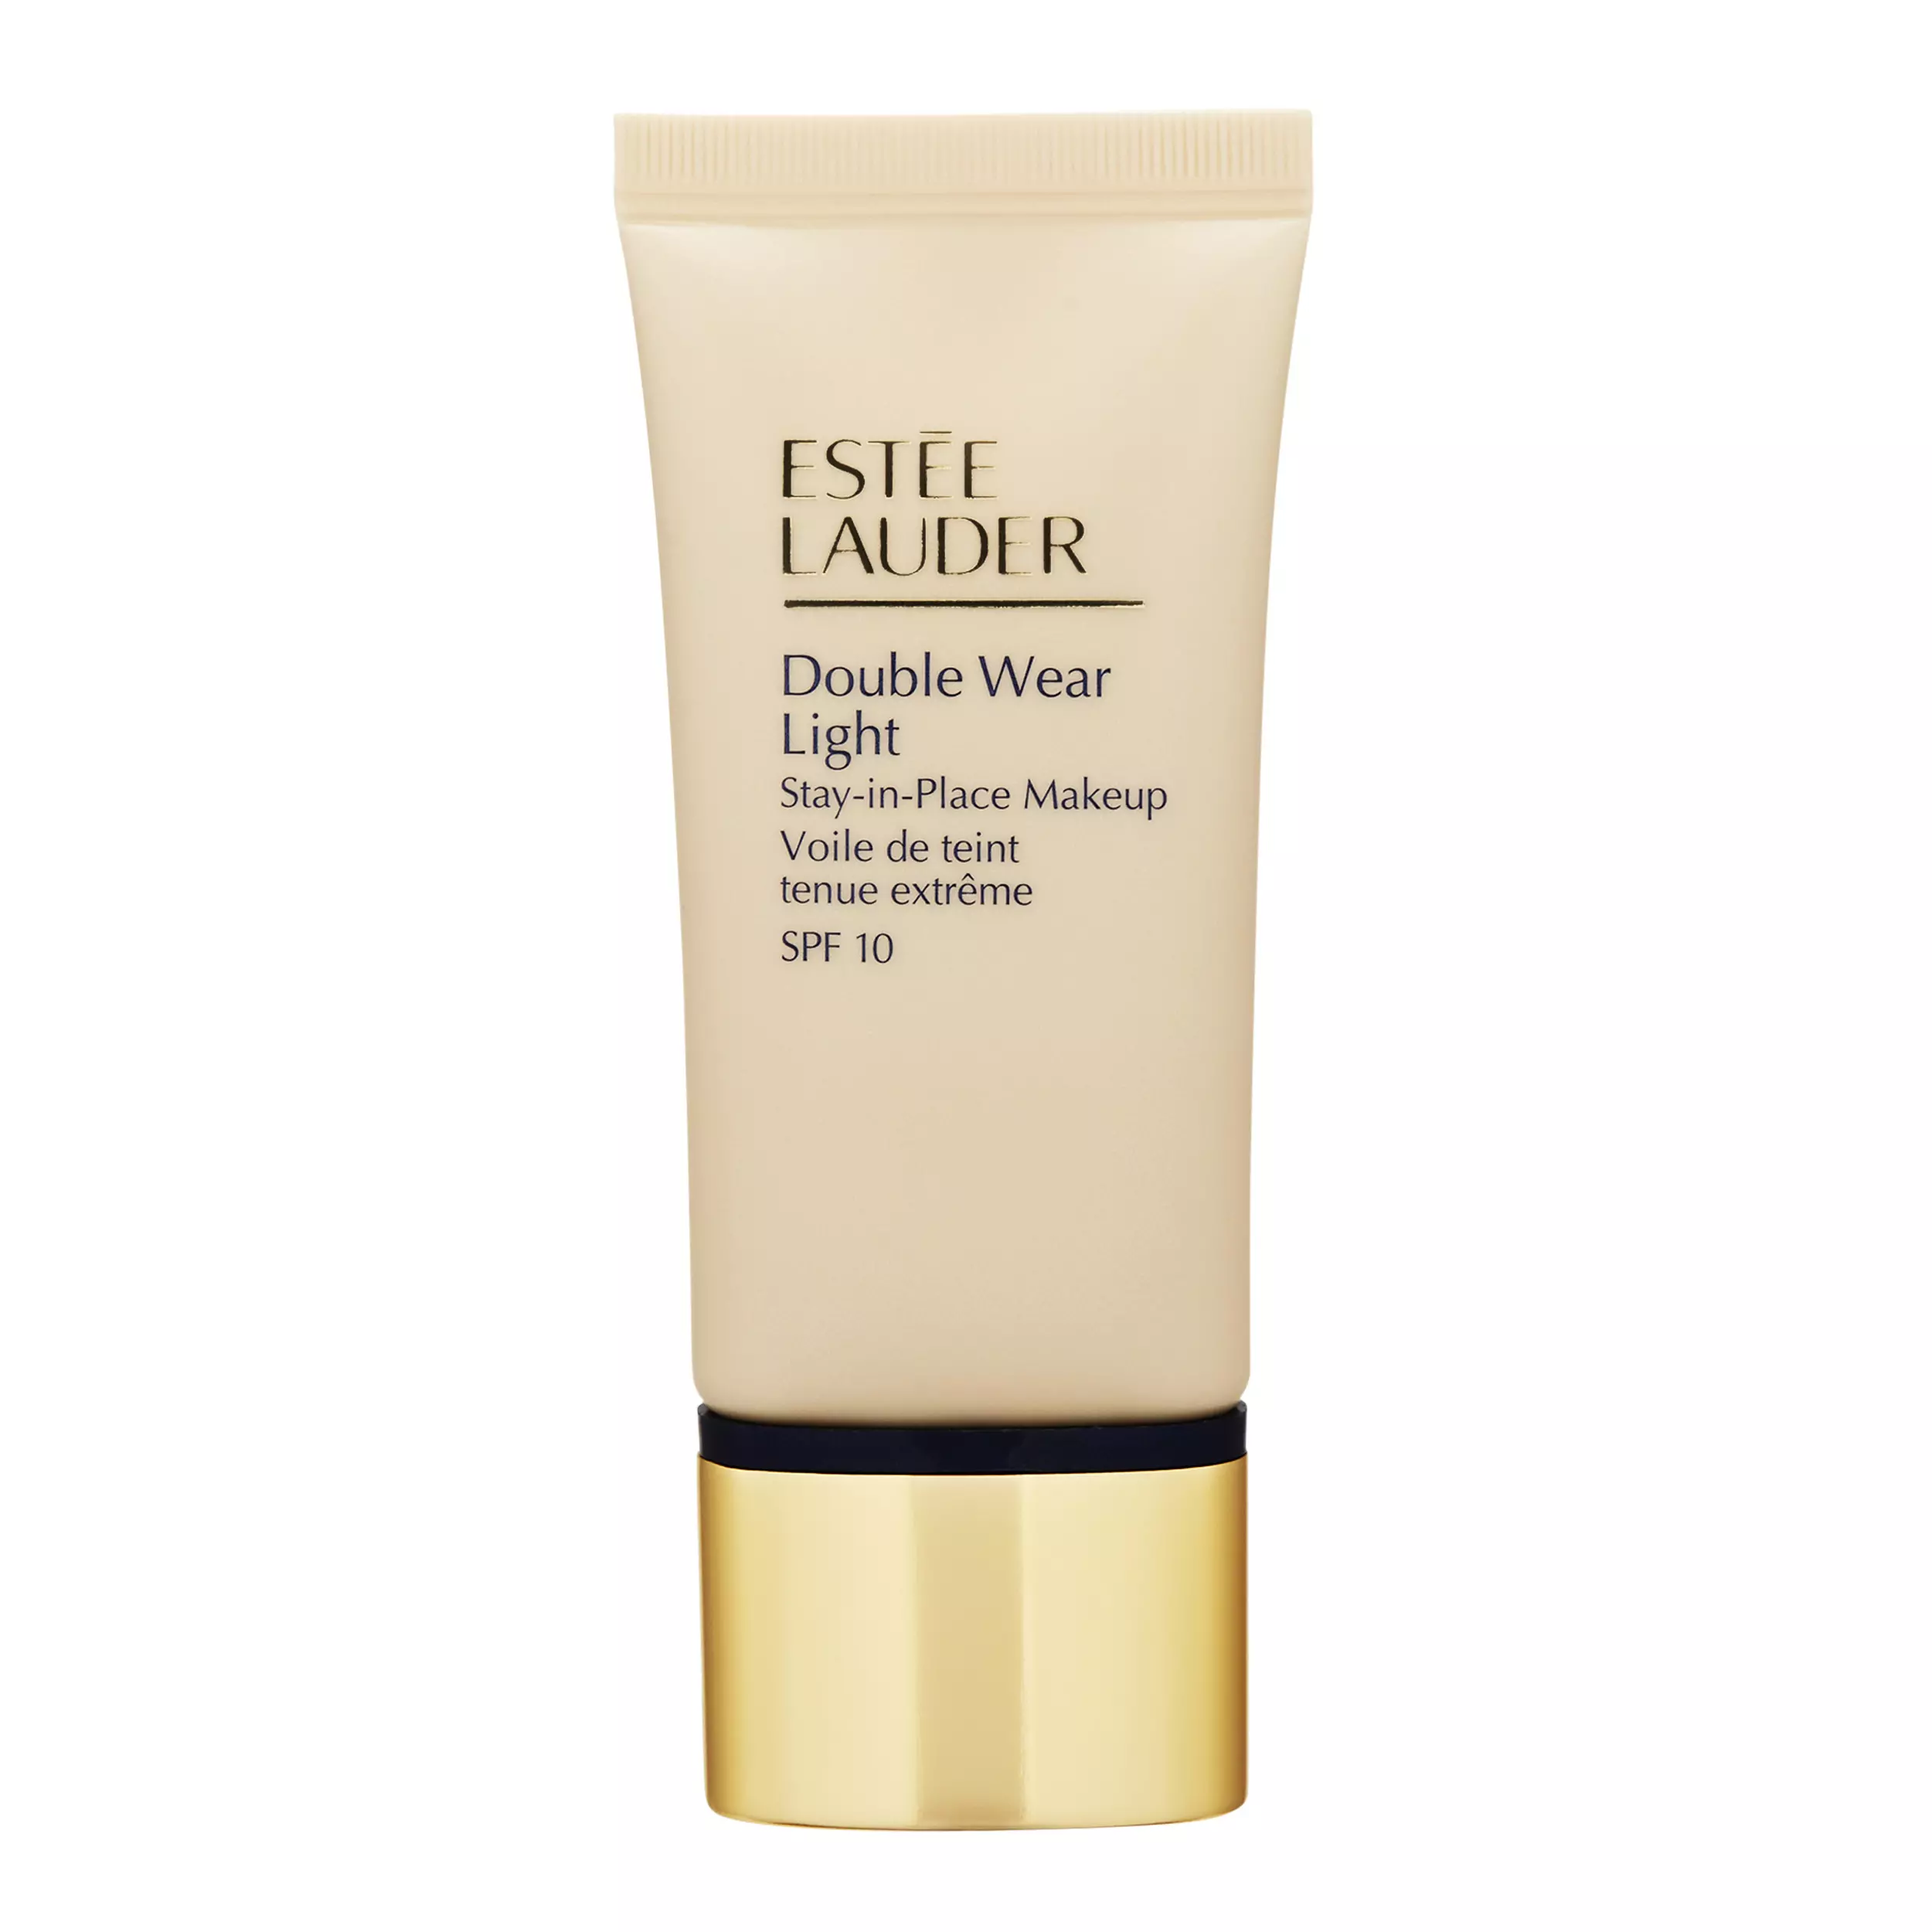 Estee Lauder Double Wear Light Stay In Place Makeup 2.0 | Glambot.com - Best deals on cosmetics